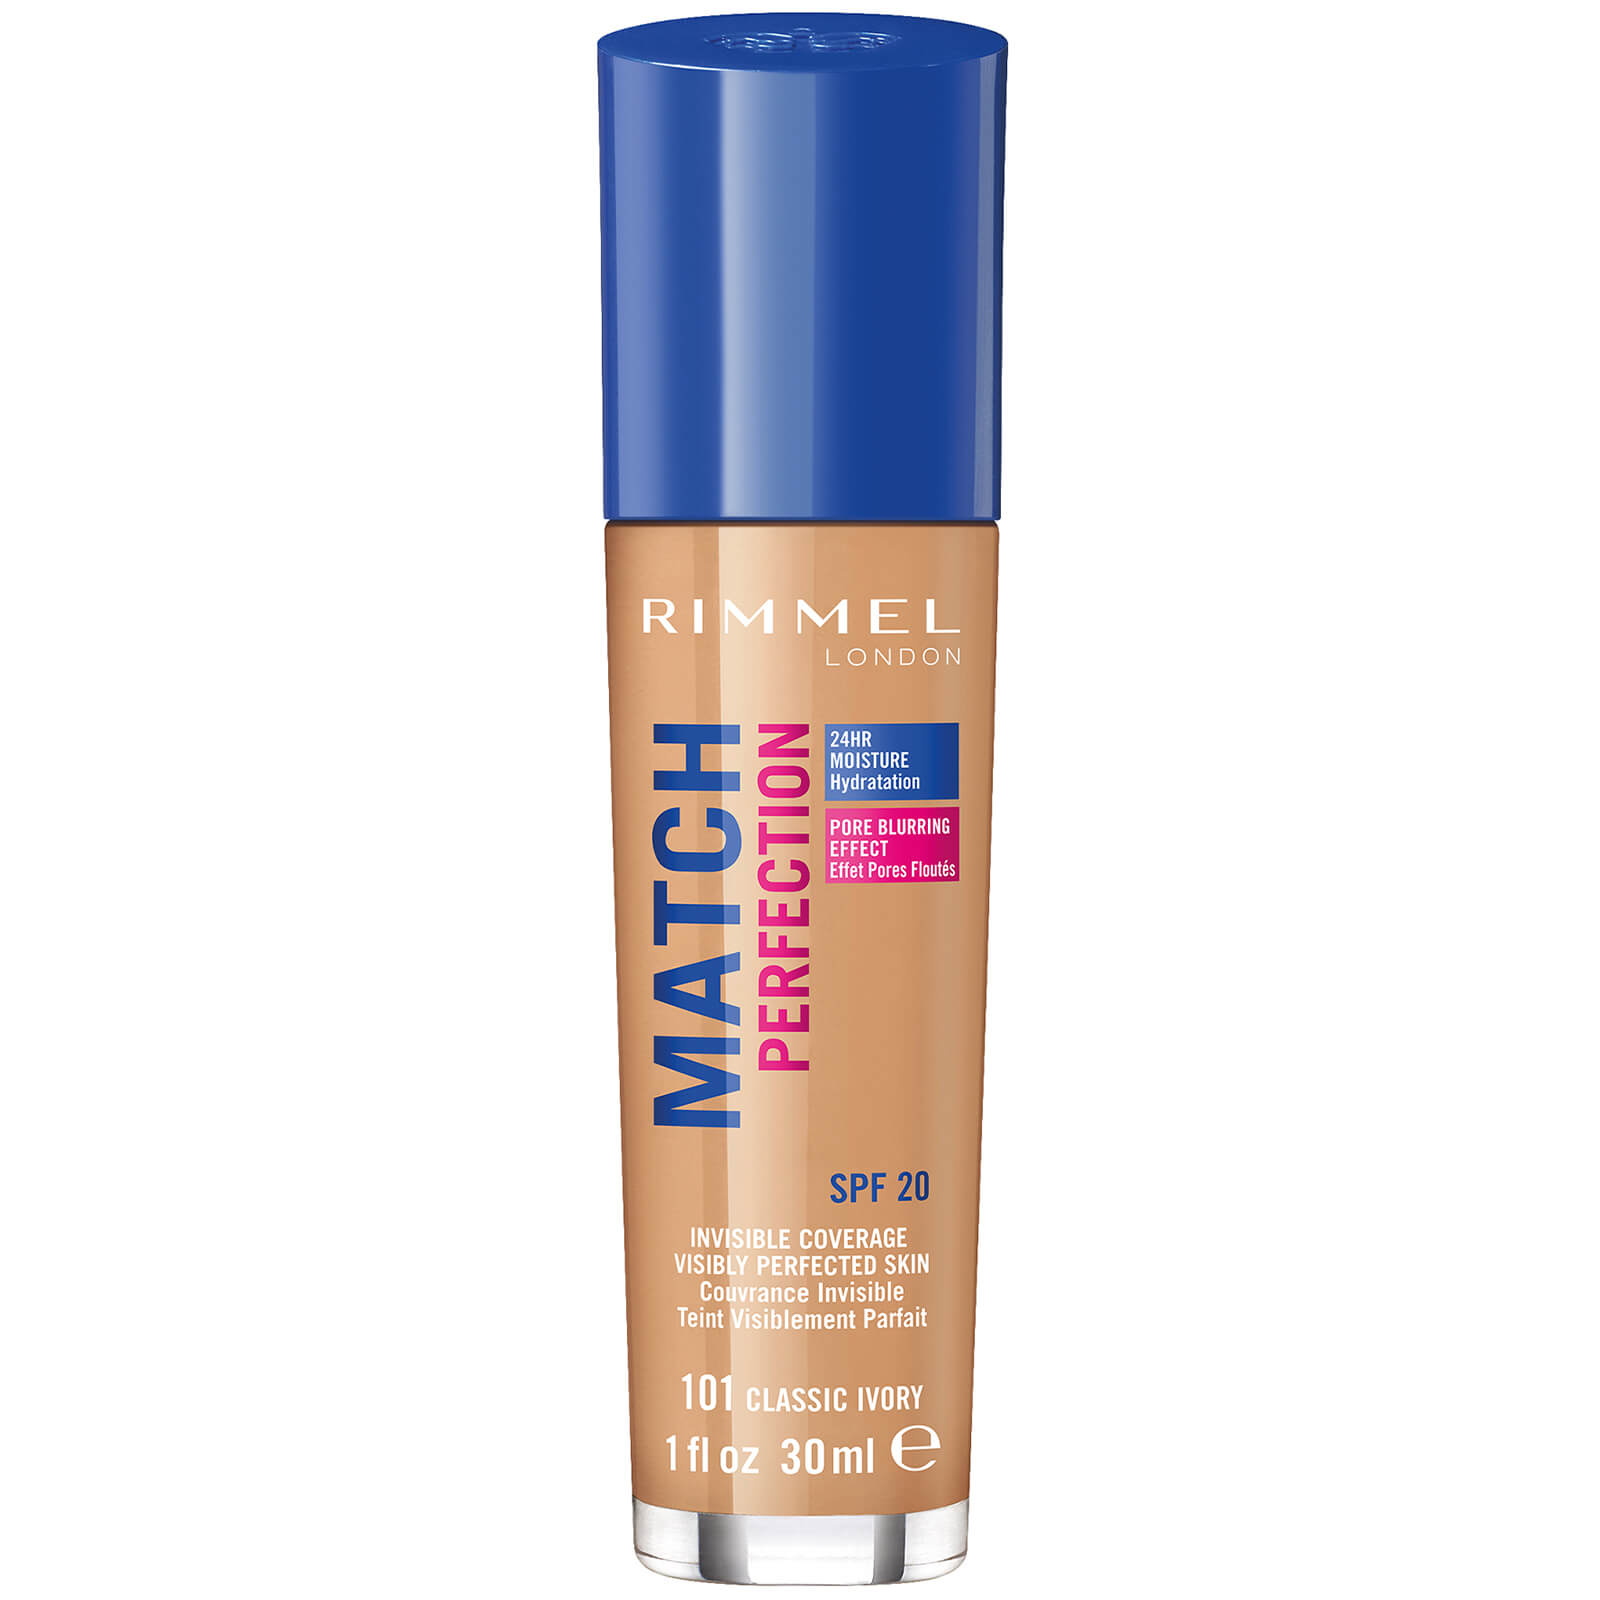 Rimmel London SPF 20 Match Perfection Foundation 30ml (Various Shades) - Classic Ivory